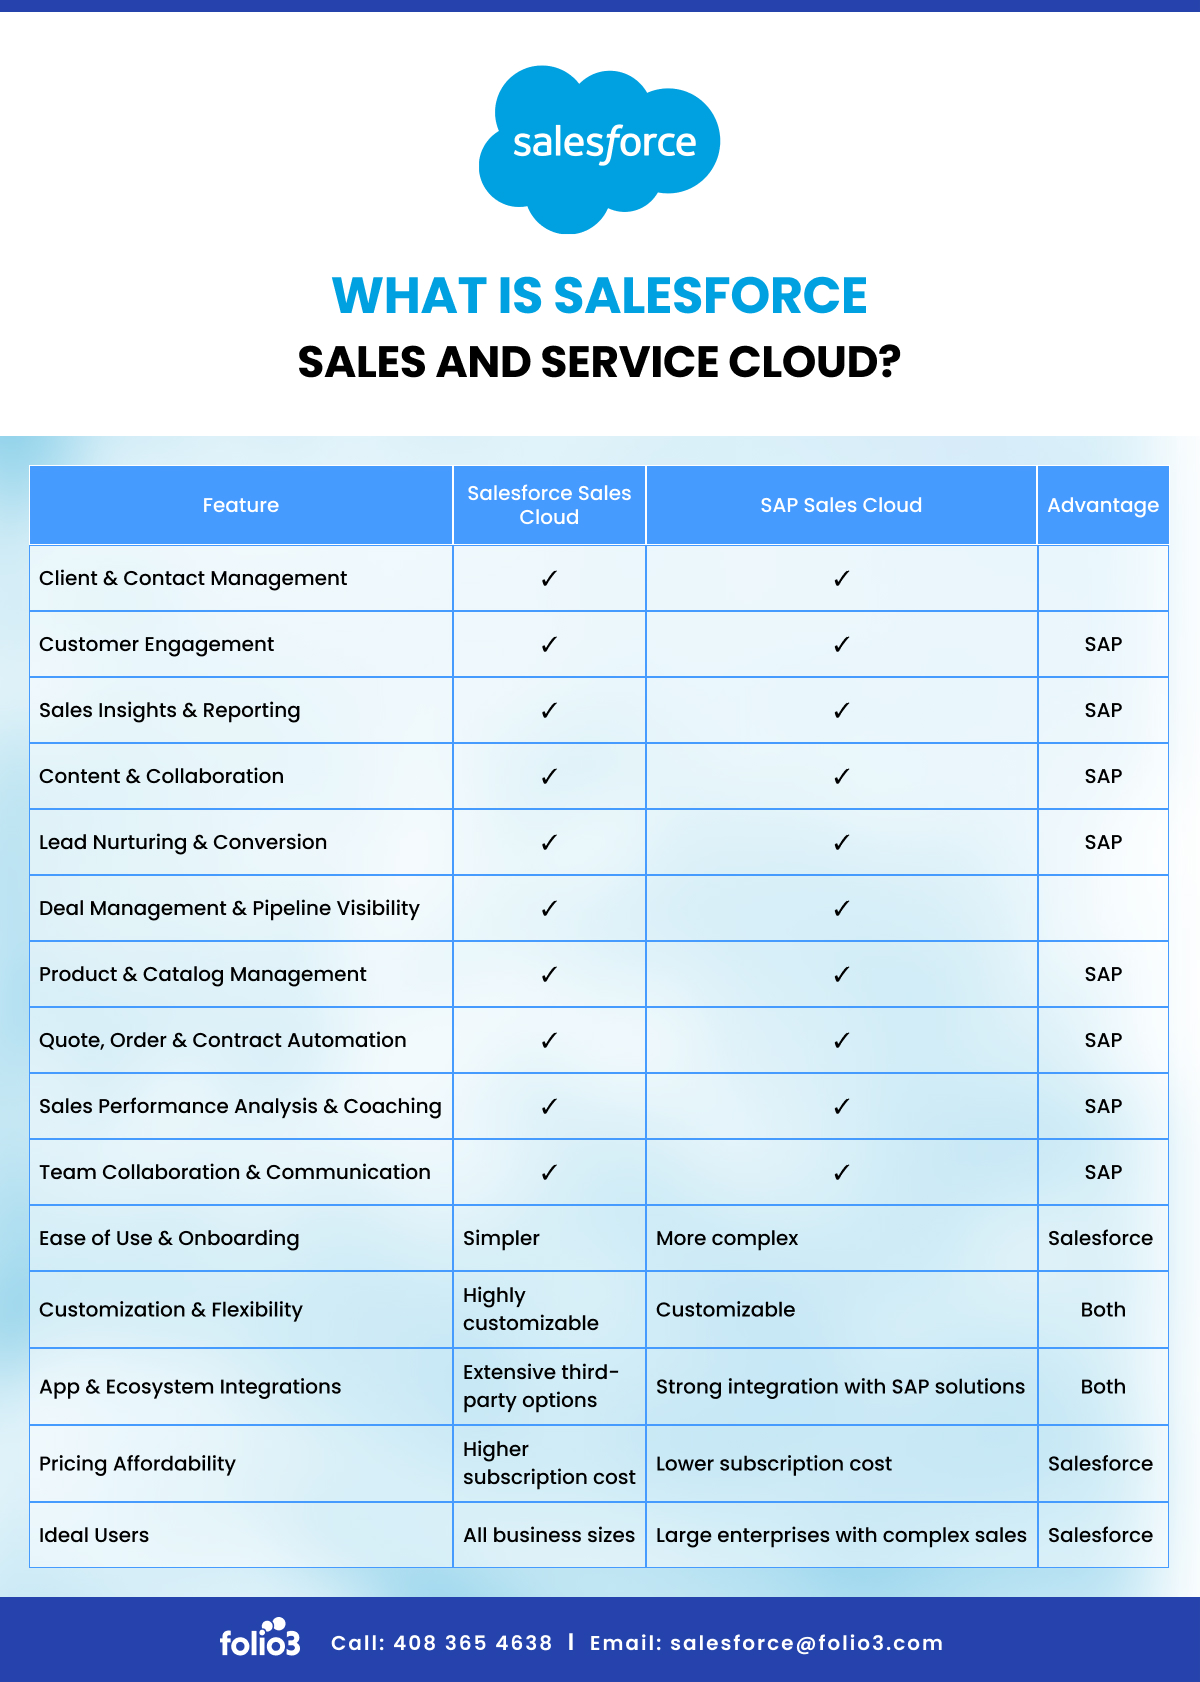 Features Offer By Salesforce and SAP